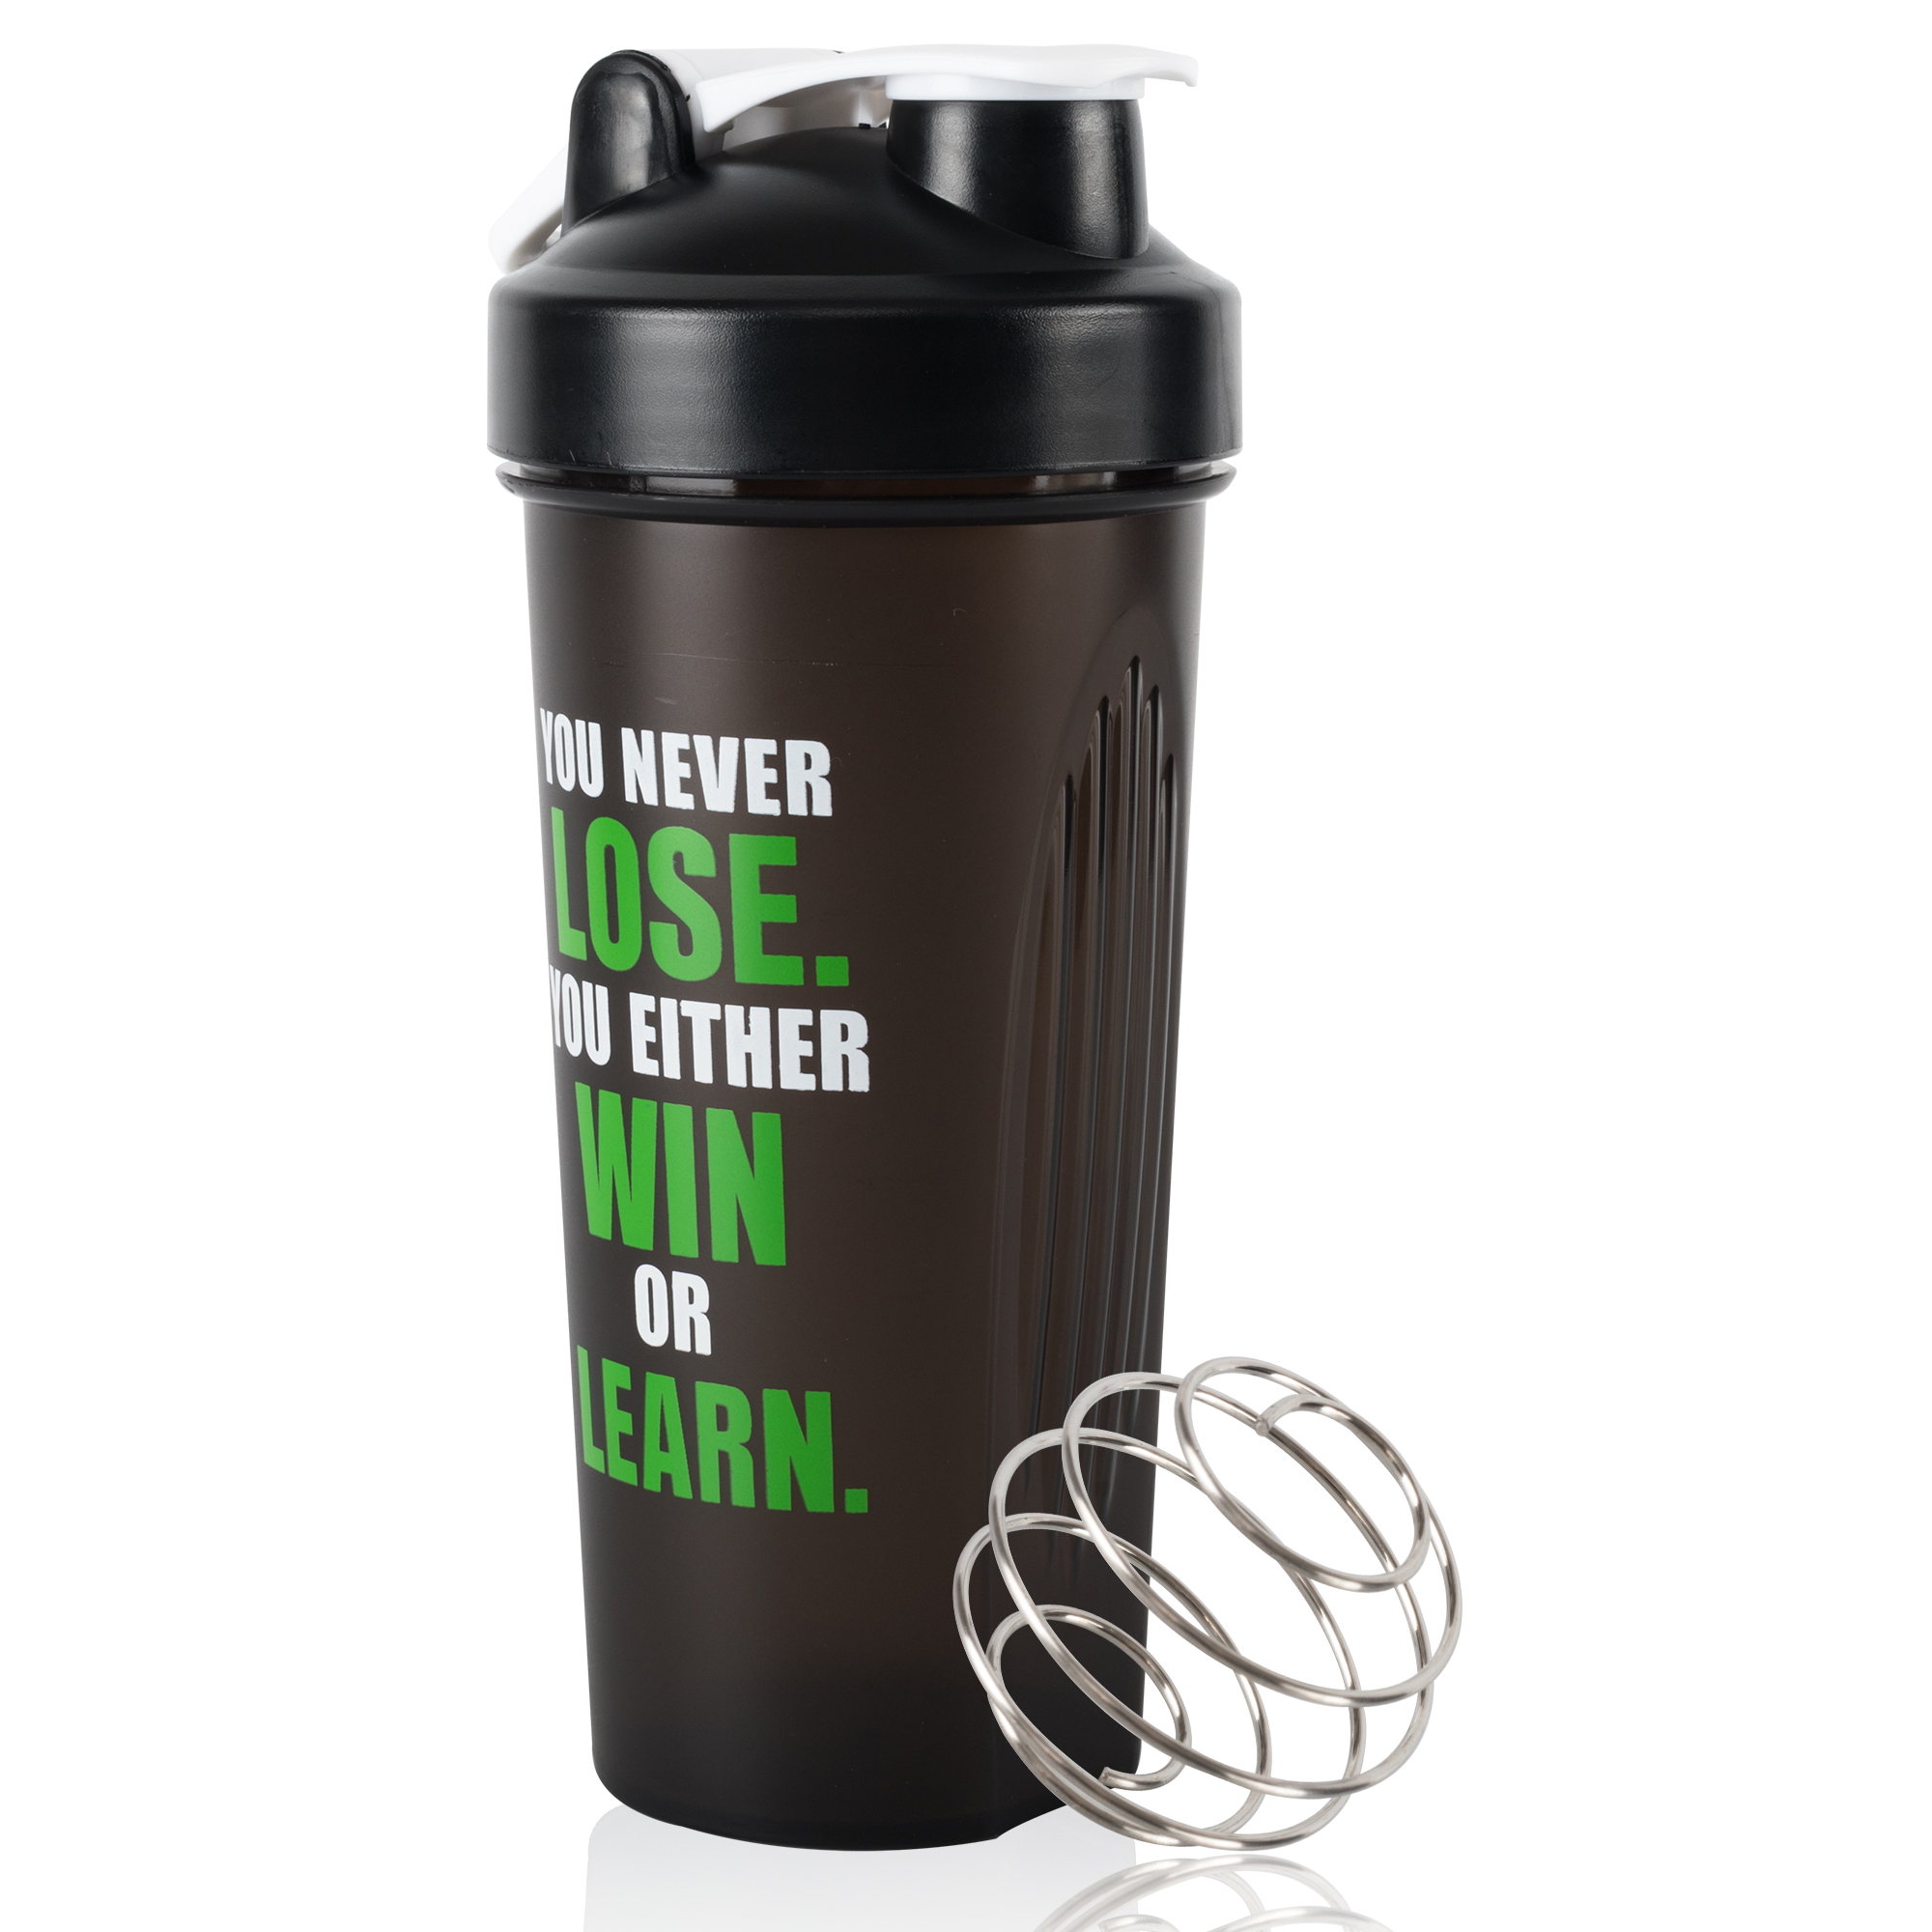 Twins' protein shaker bottle catching on with workout enthusiasts